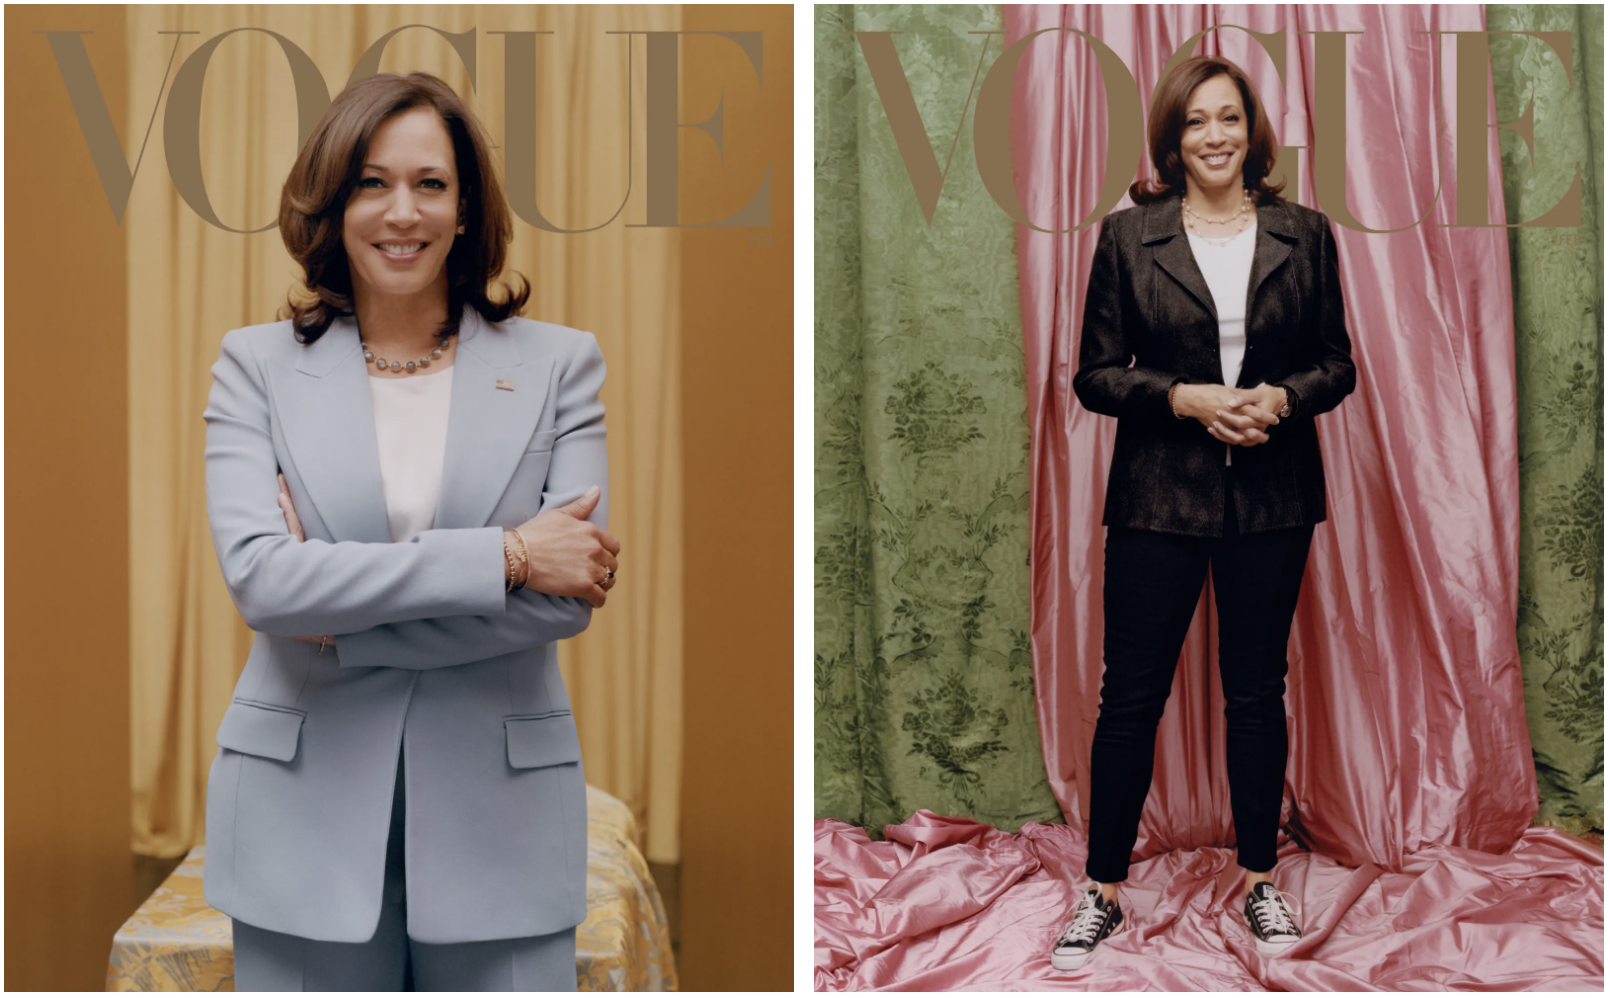 Kamala Harris Vogue Cover Sparks Controversy